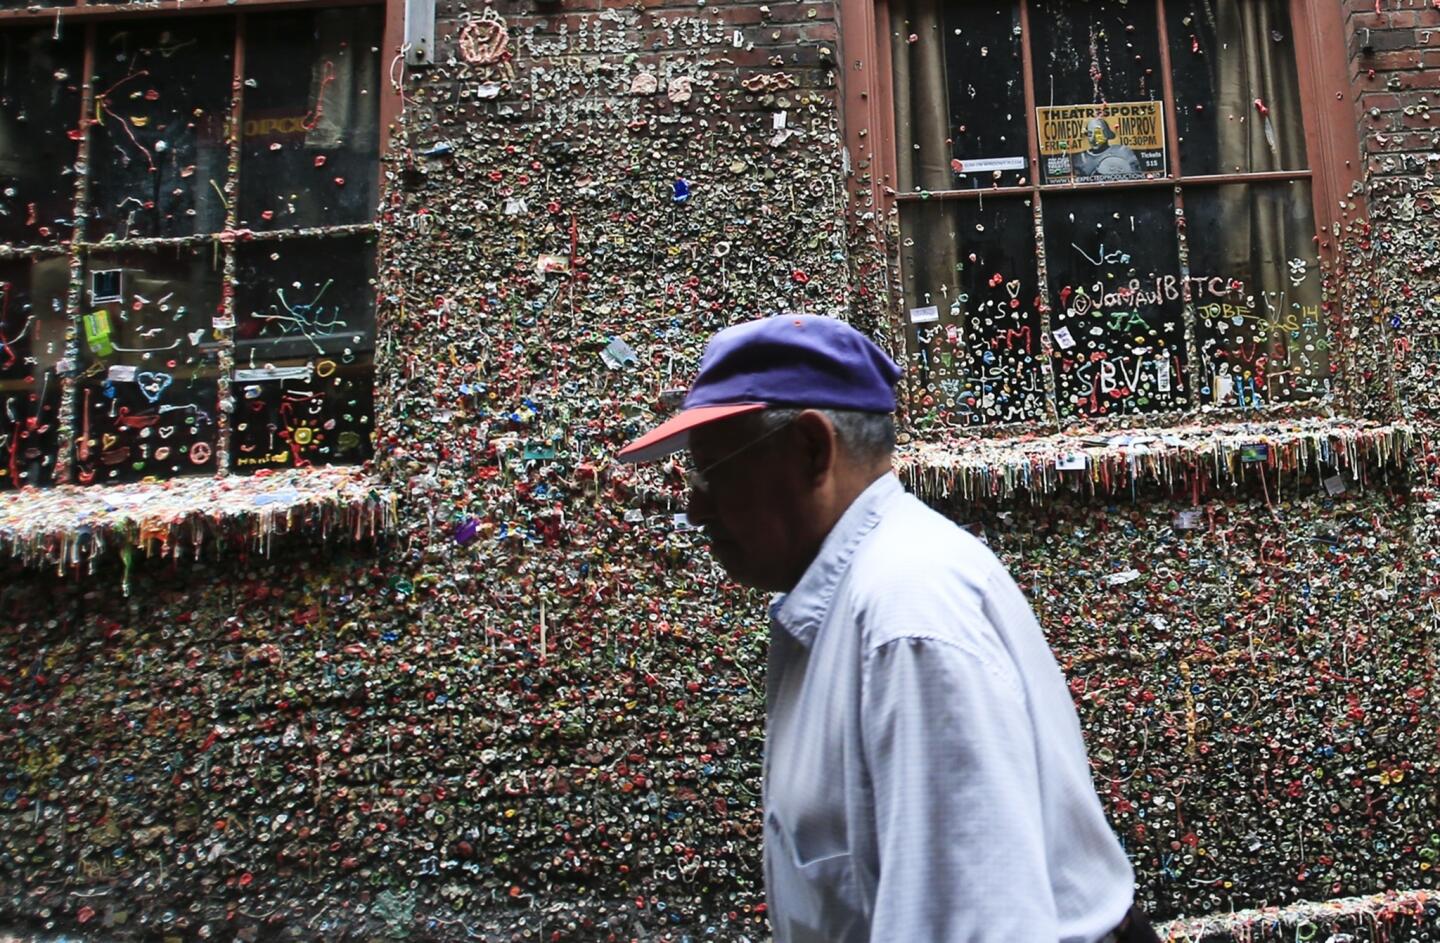 Gum-covered walls